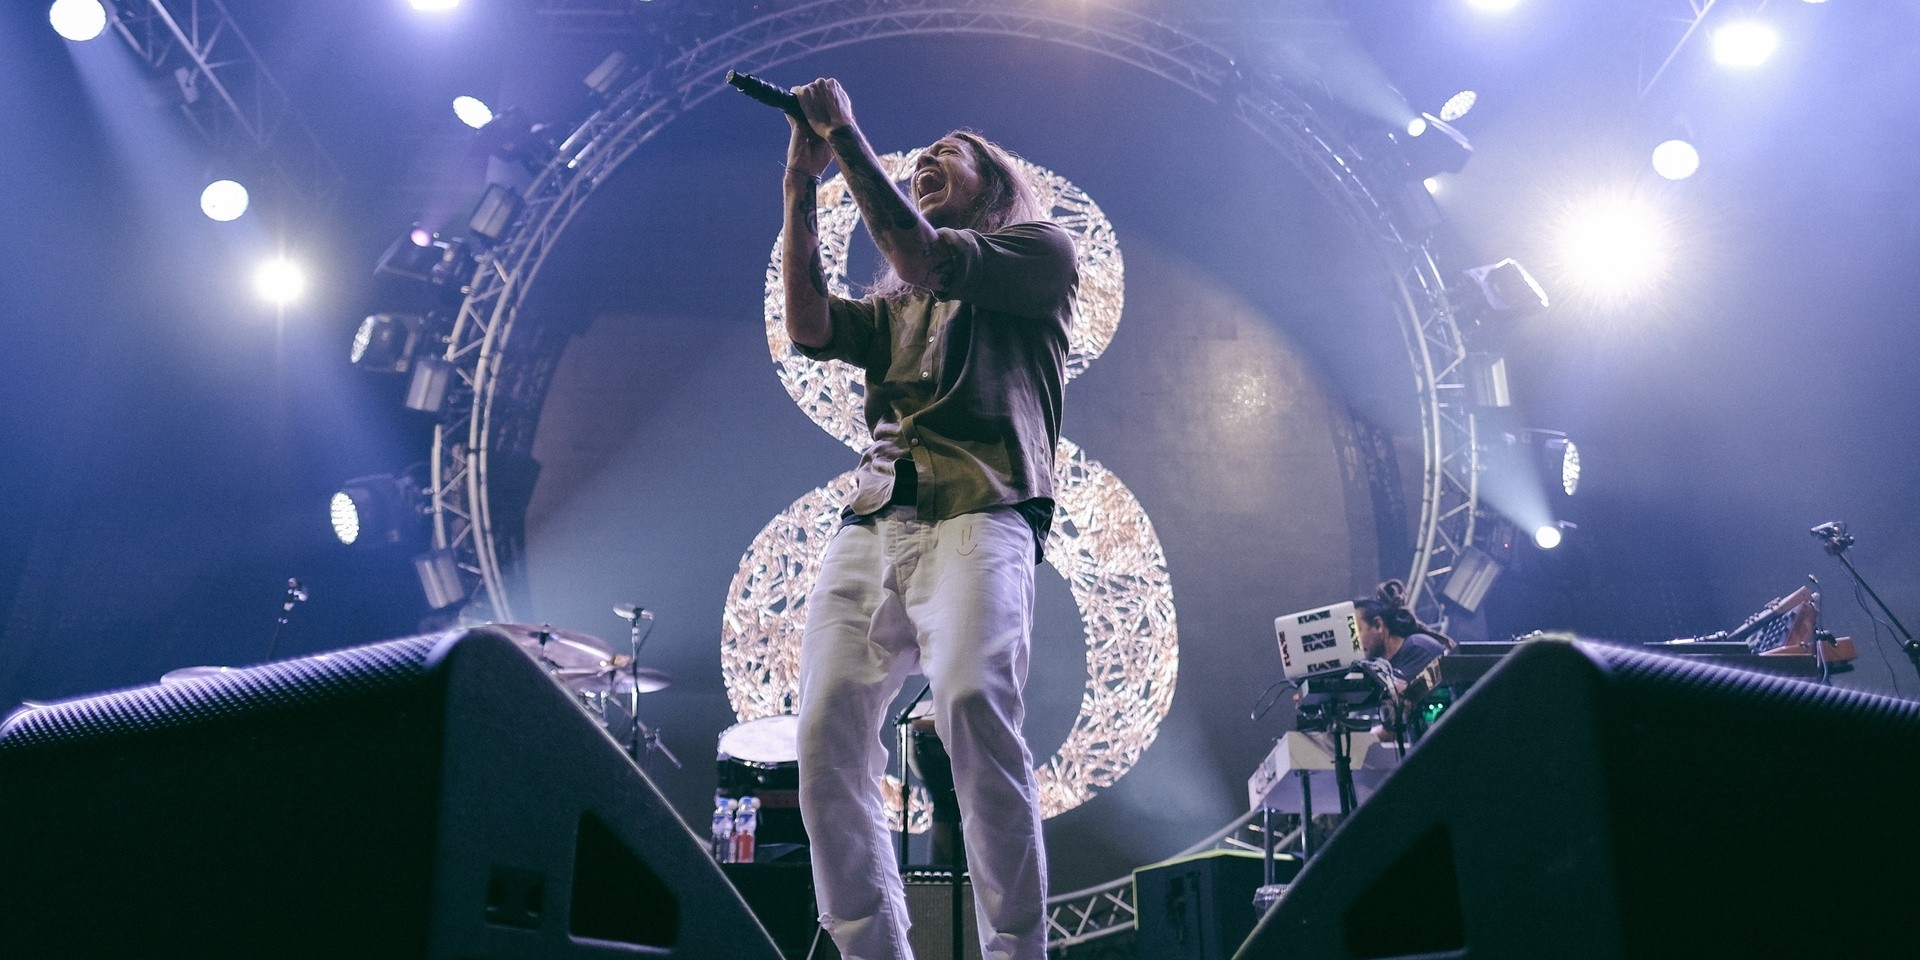 Raising the bar for rock legends, Incubus sets us back to the core of their music – gig report